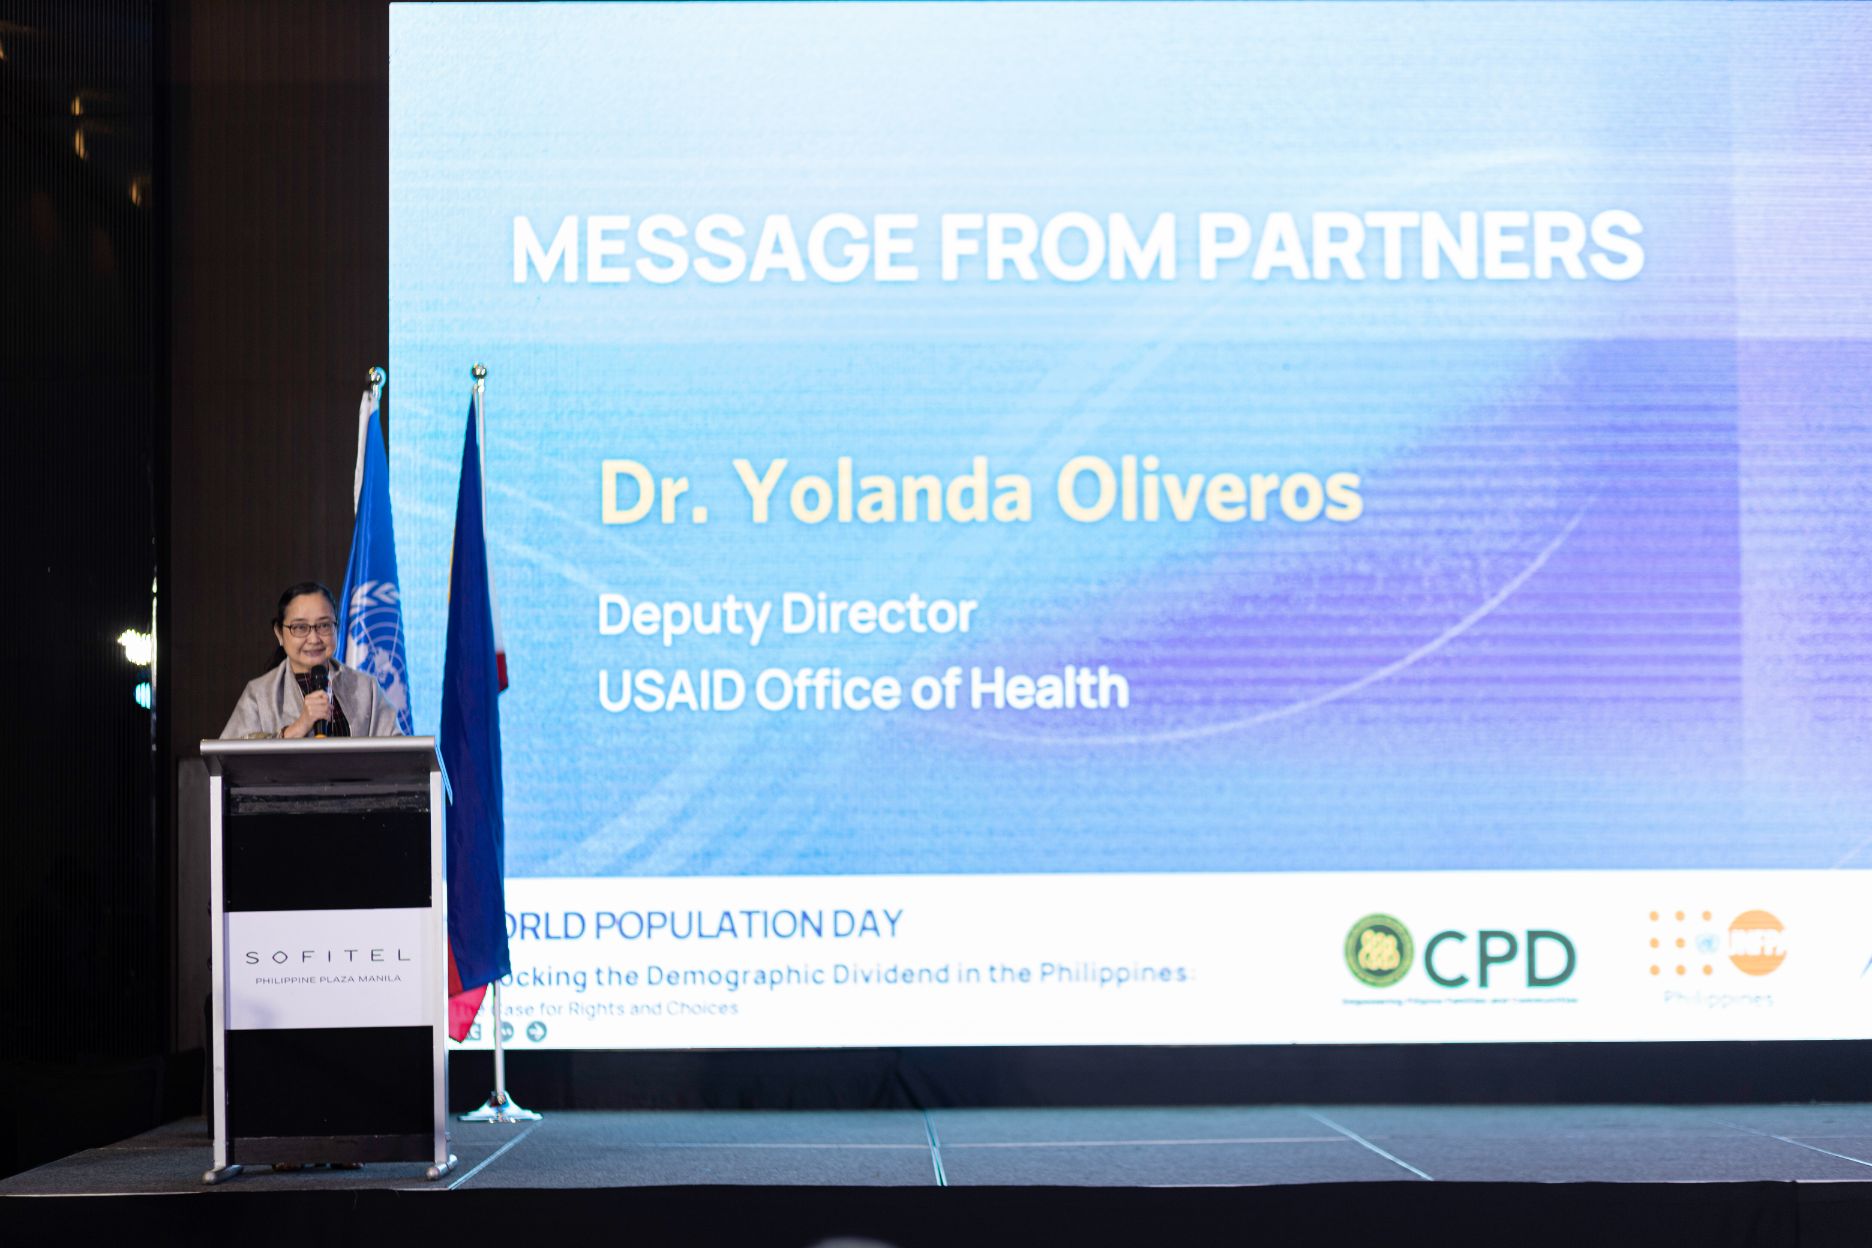 USAID’s Deputy Director of the Office of Health Dr. Yolanda Oliveros